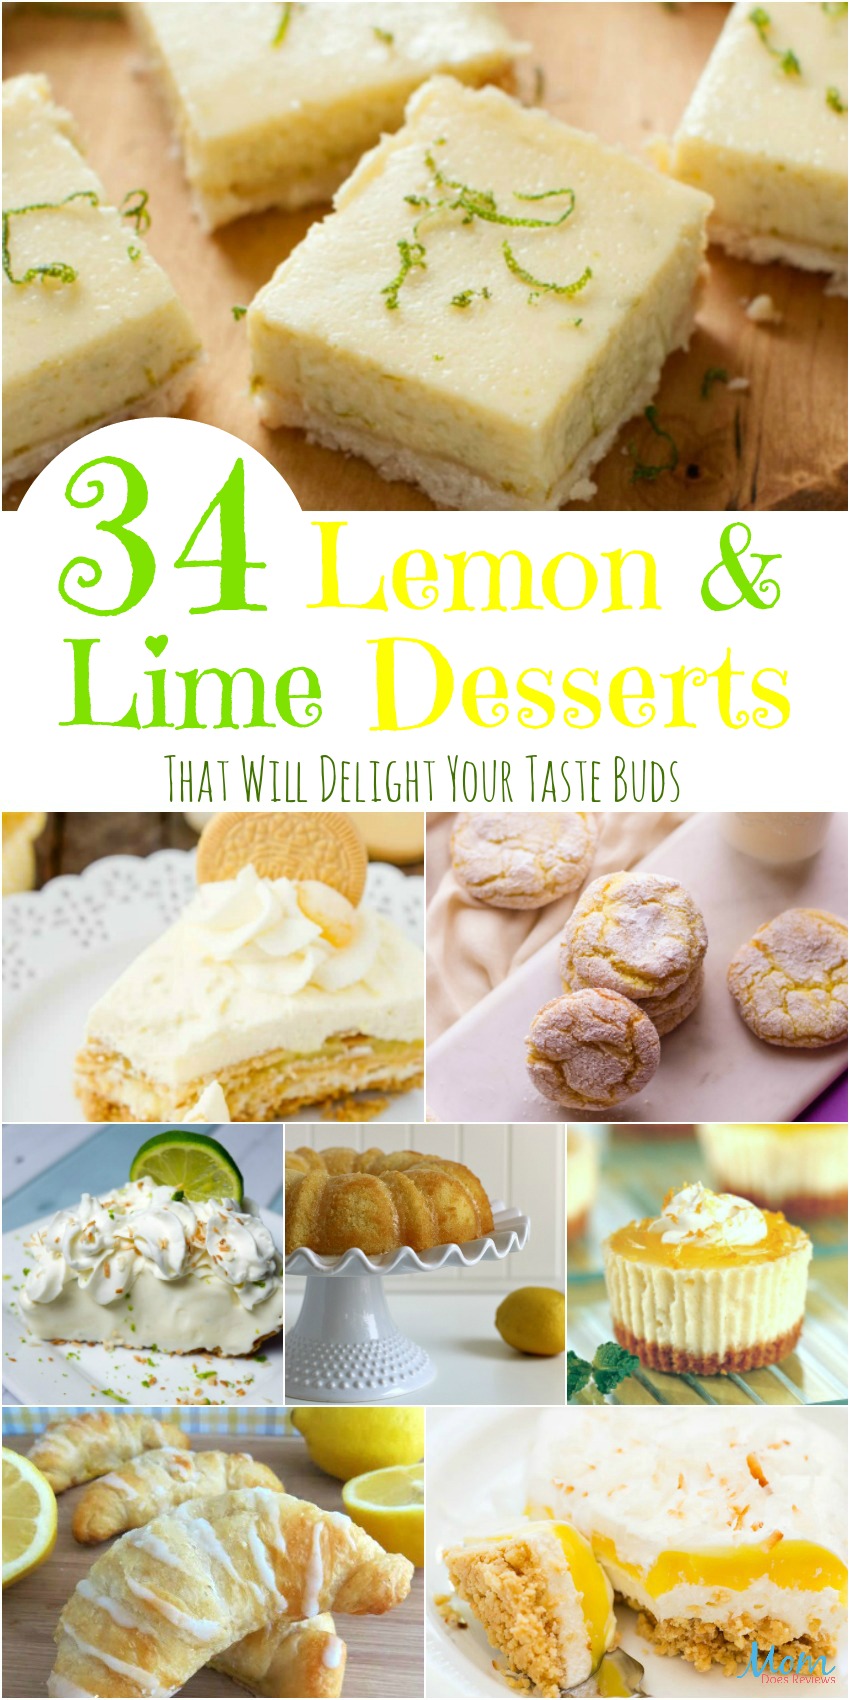 34 Lemon and Lime Desserts That Will Delight Your Taste Buds {Part 1}